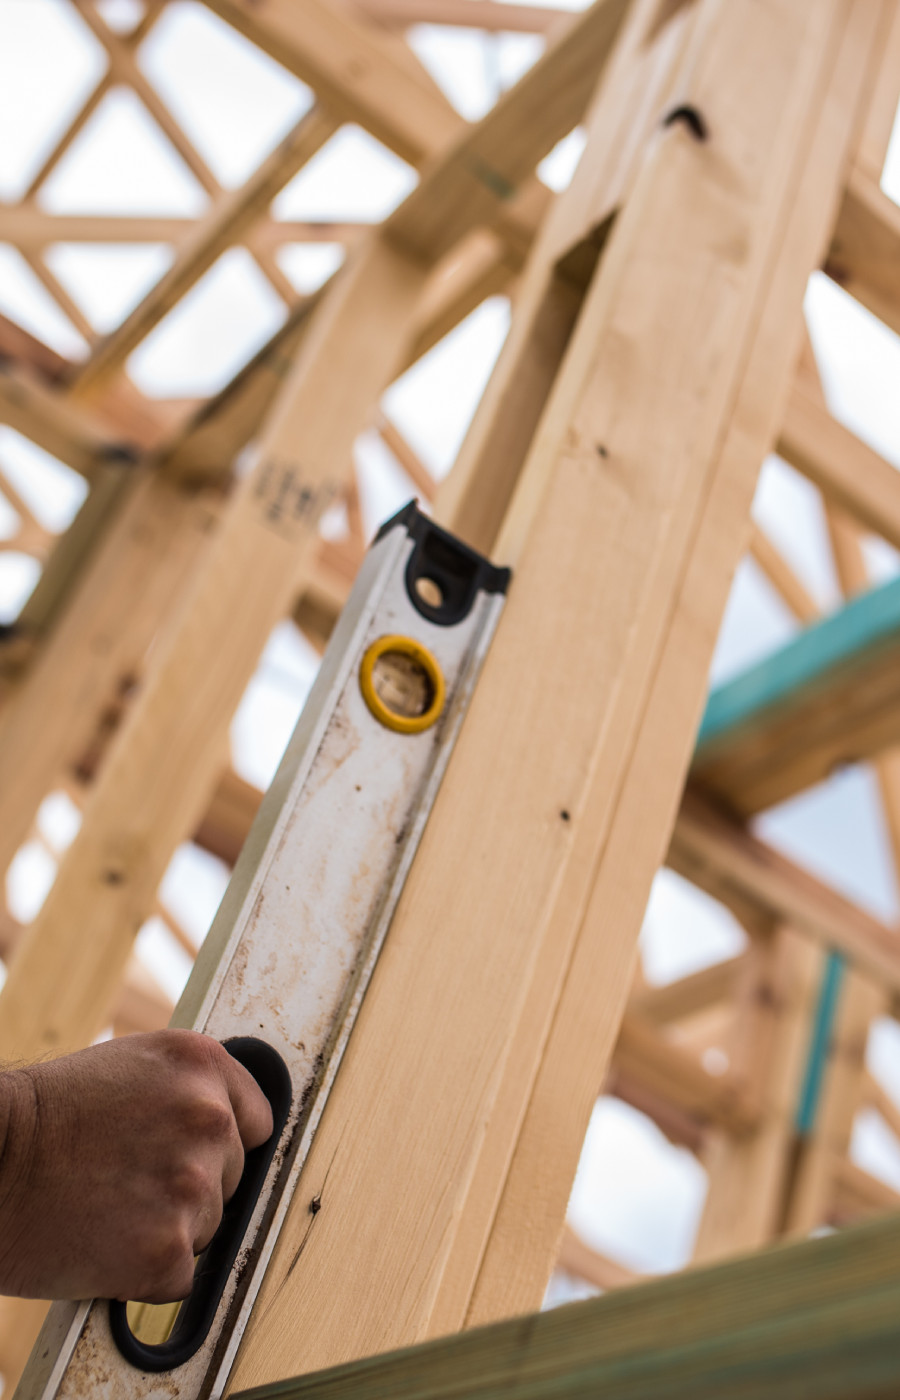 building inspector holding a spirit level against a timber frame on a house under construction